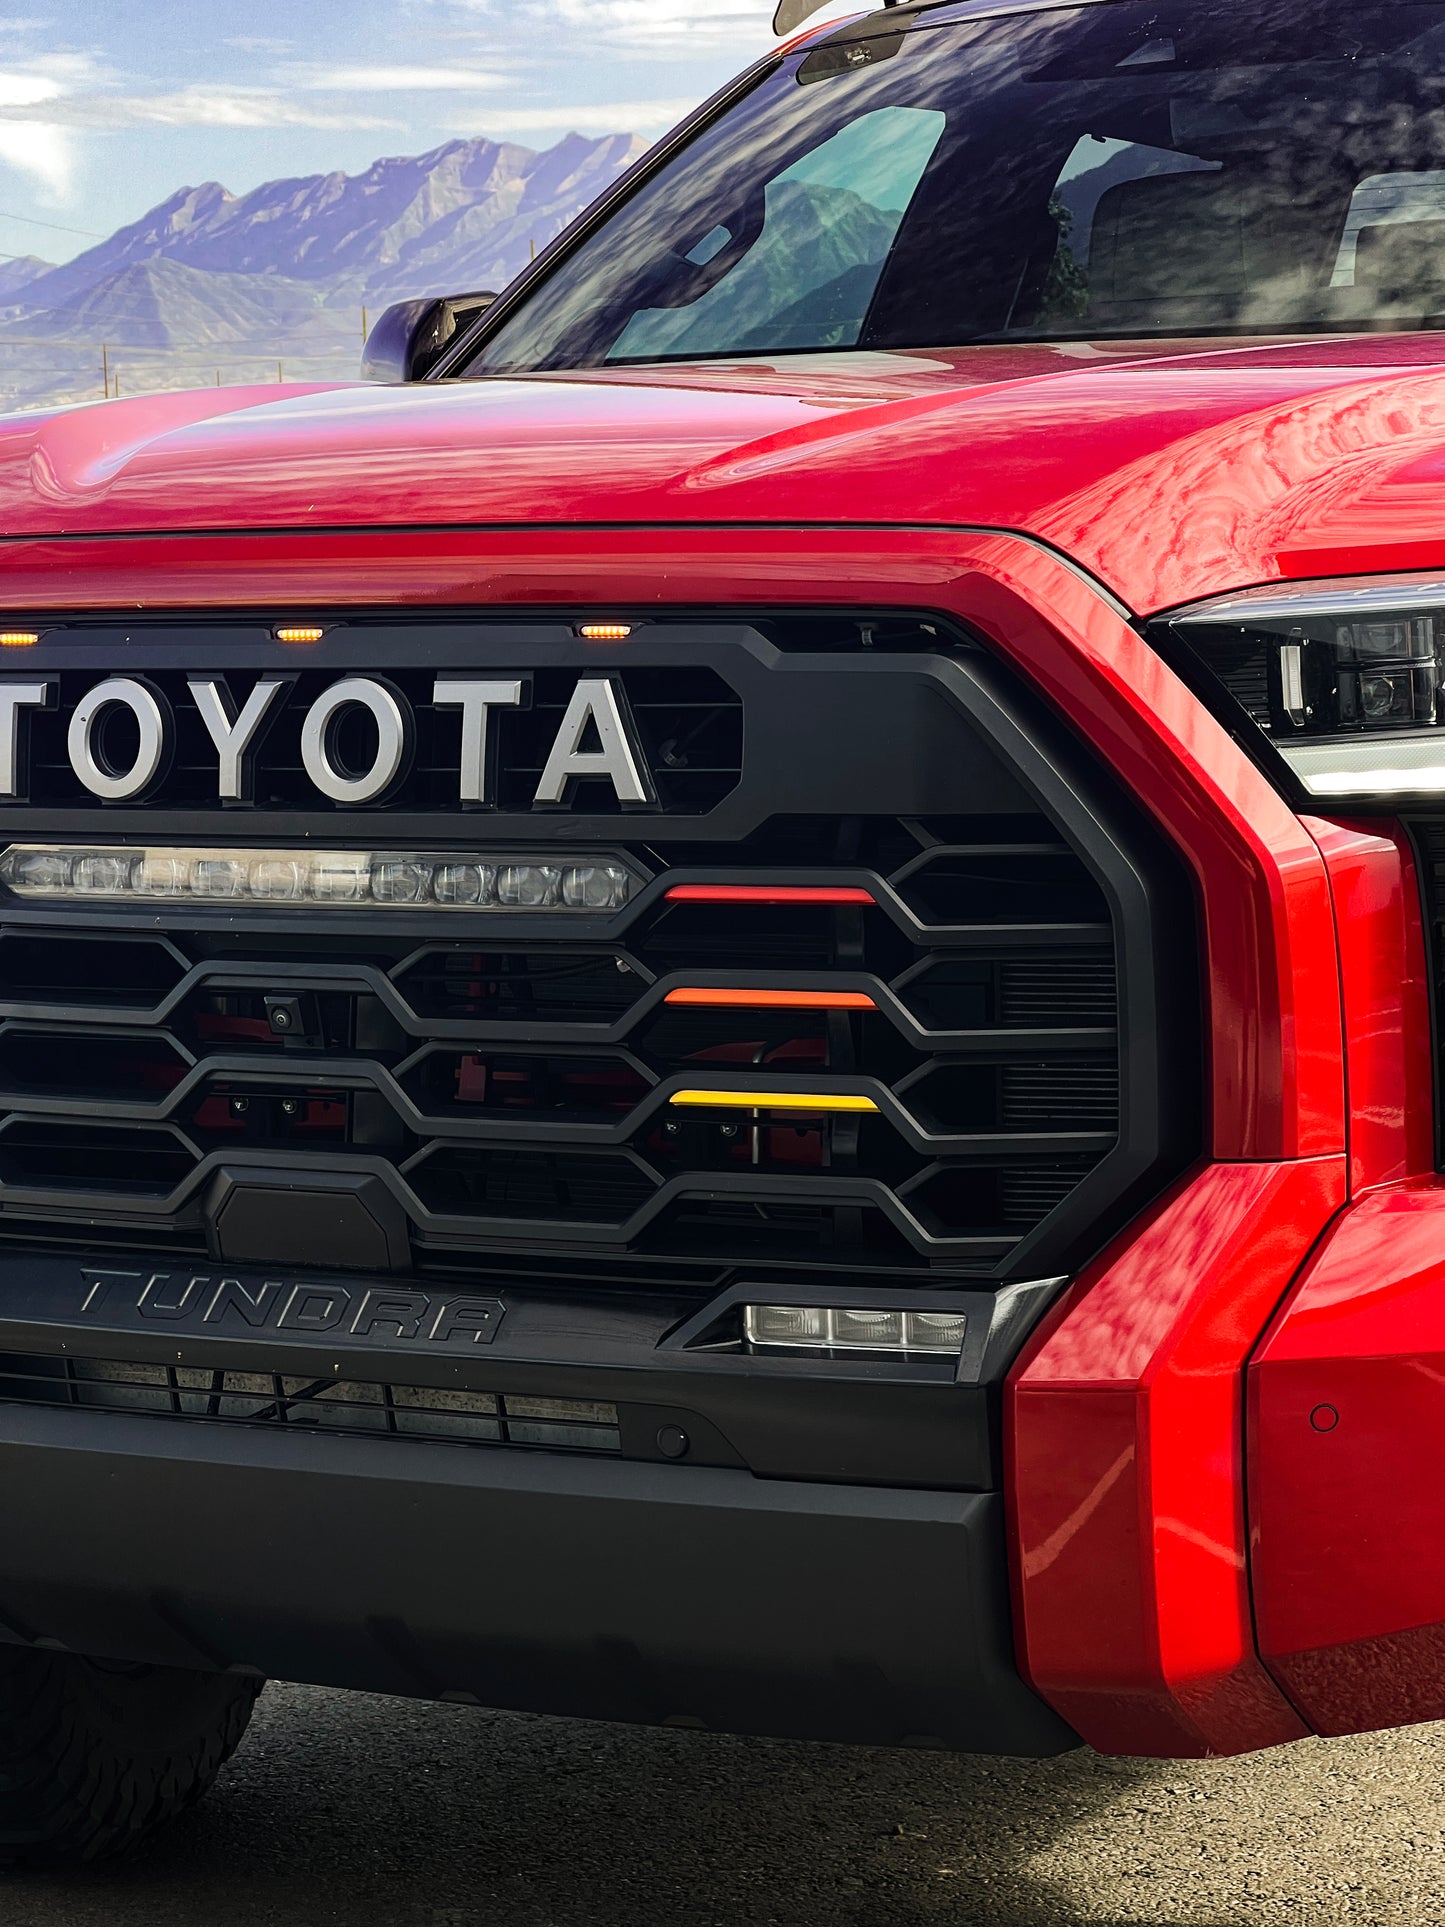 Heritage Grille Decals ( Red, Orange, Yellow) for 2023+ Sequoia